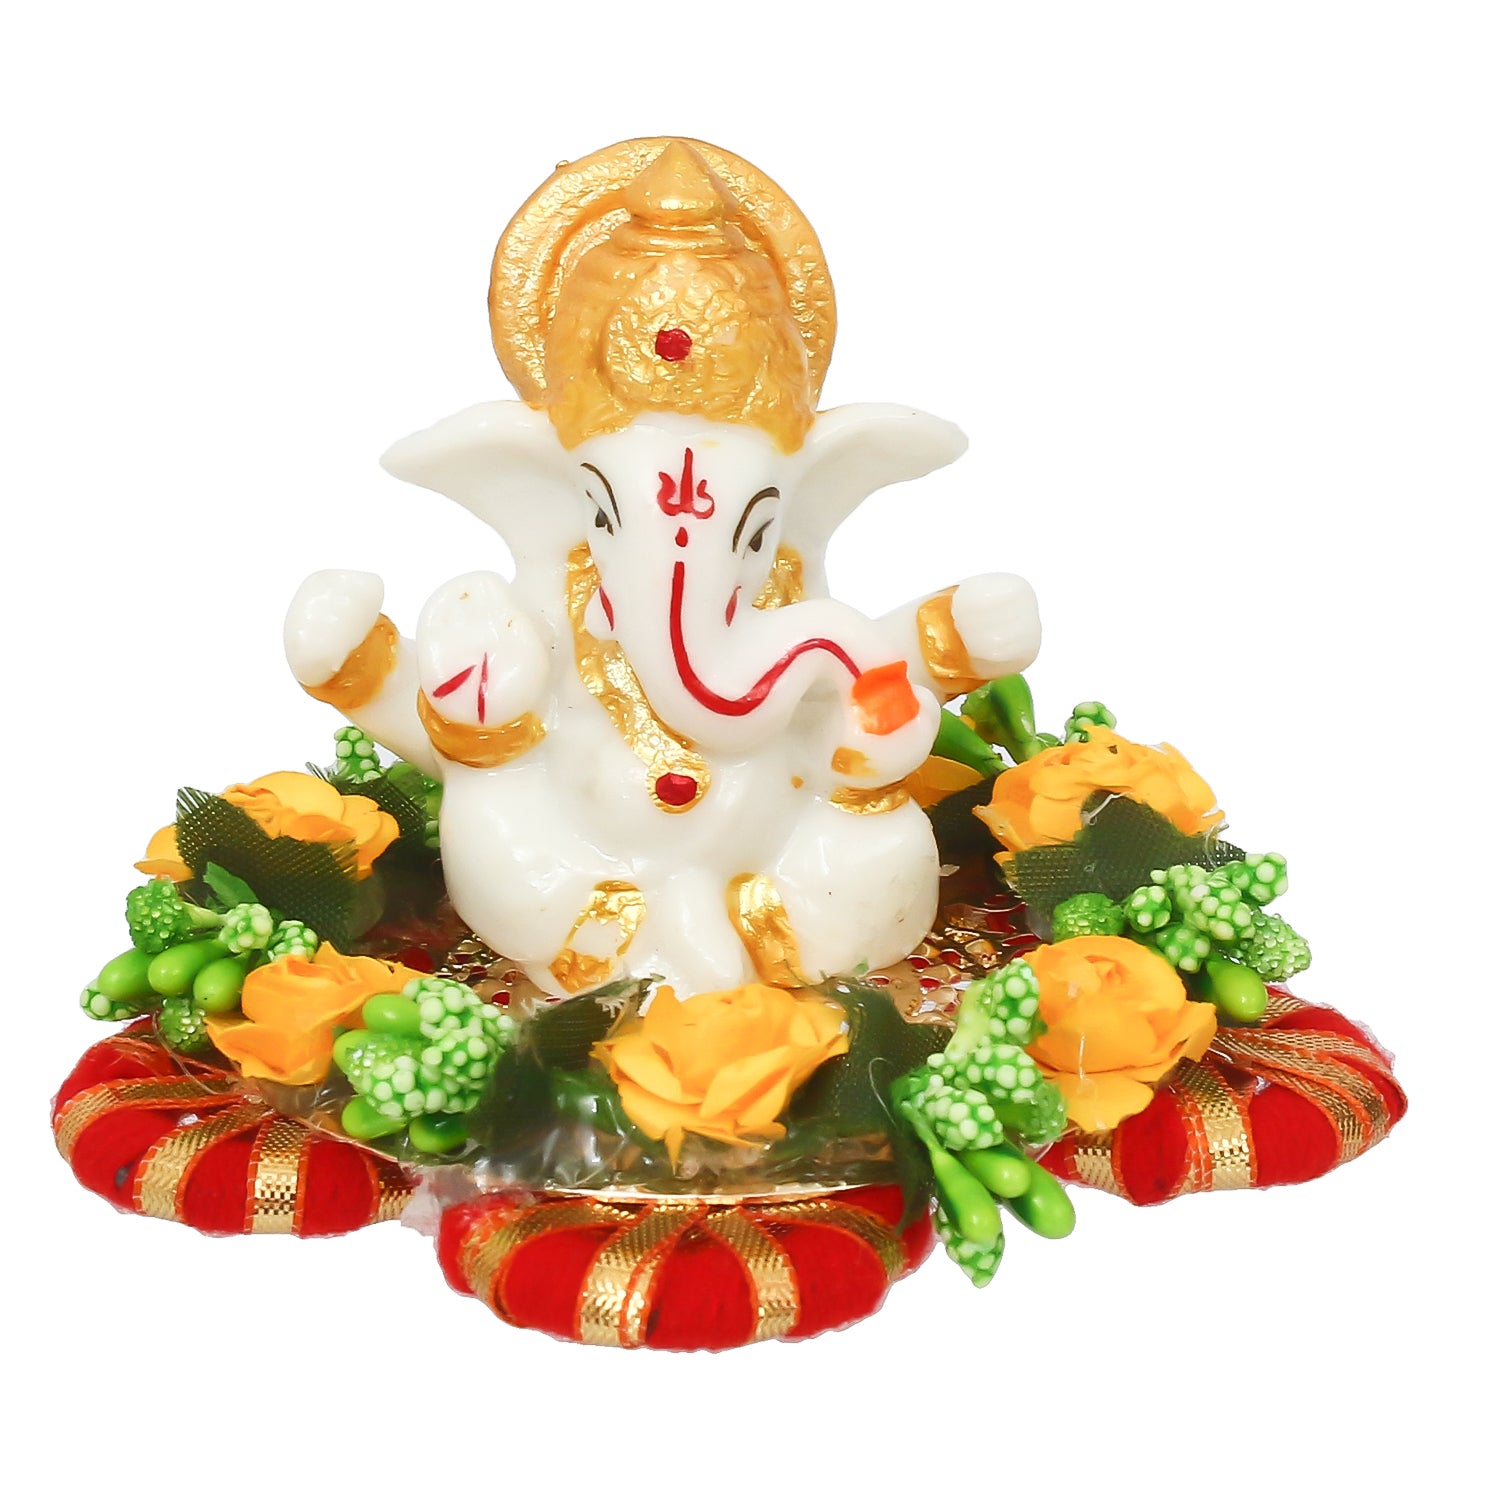 Lord Ganesha Idol On Decorative Handicrafted Plate For Home And Car Dashboard 1